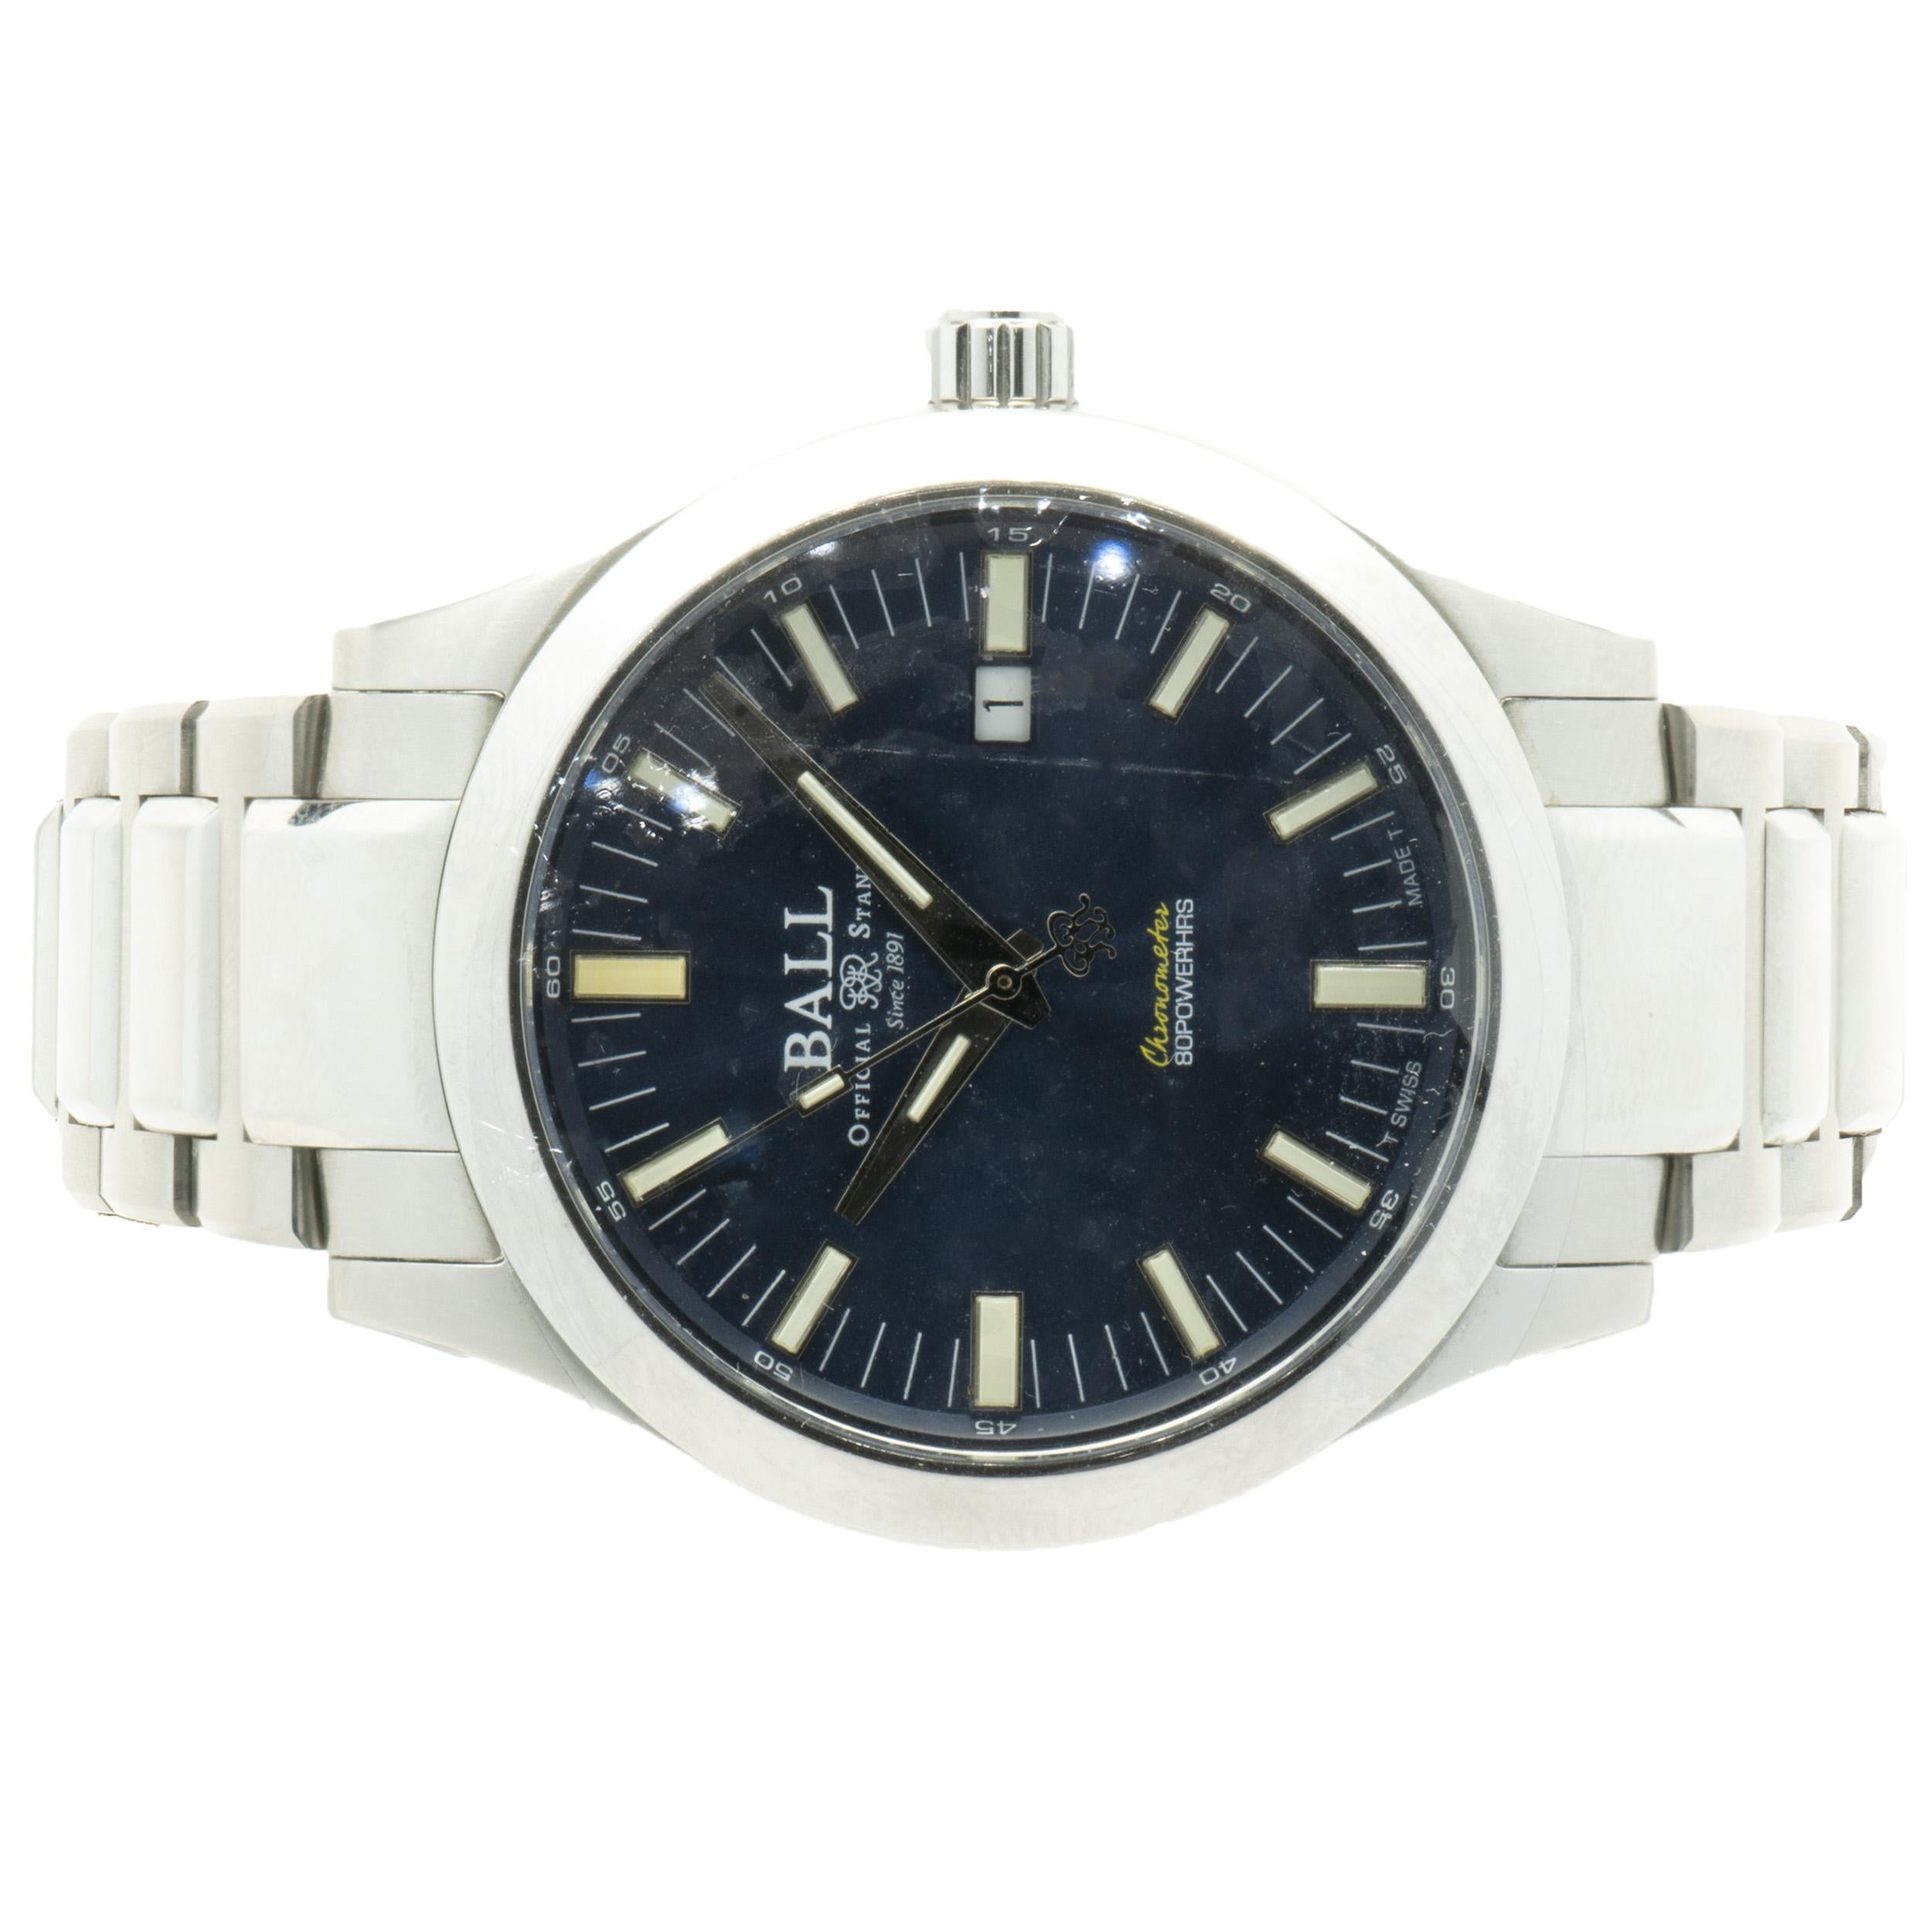 Movement: automatic 
Function:  hours, minutes, seconds, date
Case: 43mm round stainless steel, anti-reflective sapphire crystal, screw-down crown, stainless steel bracelet, deployment clasp
Dial: blue stick
Serial: 3801XXX
Reference: